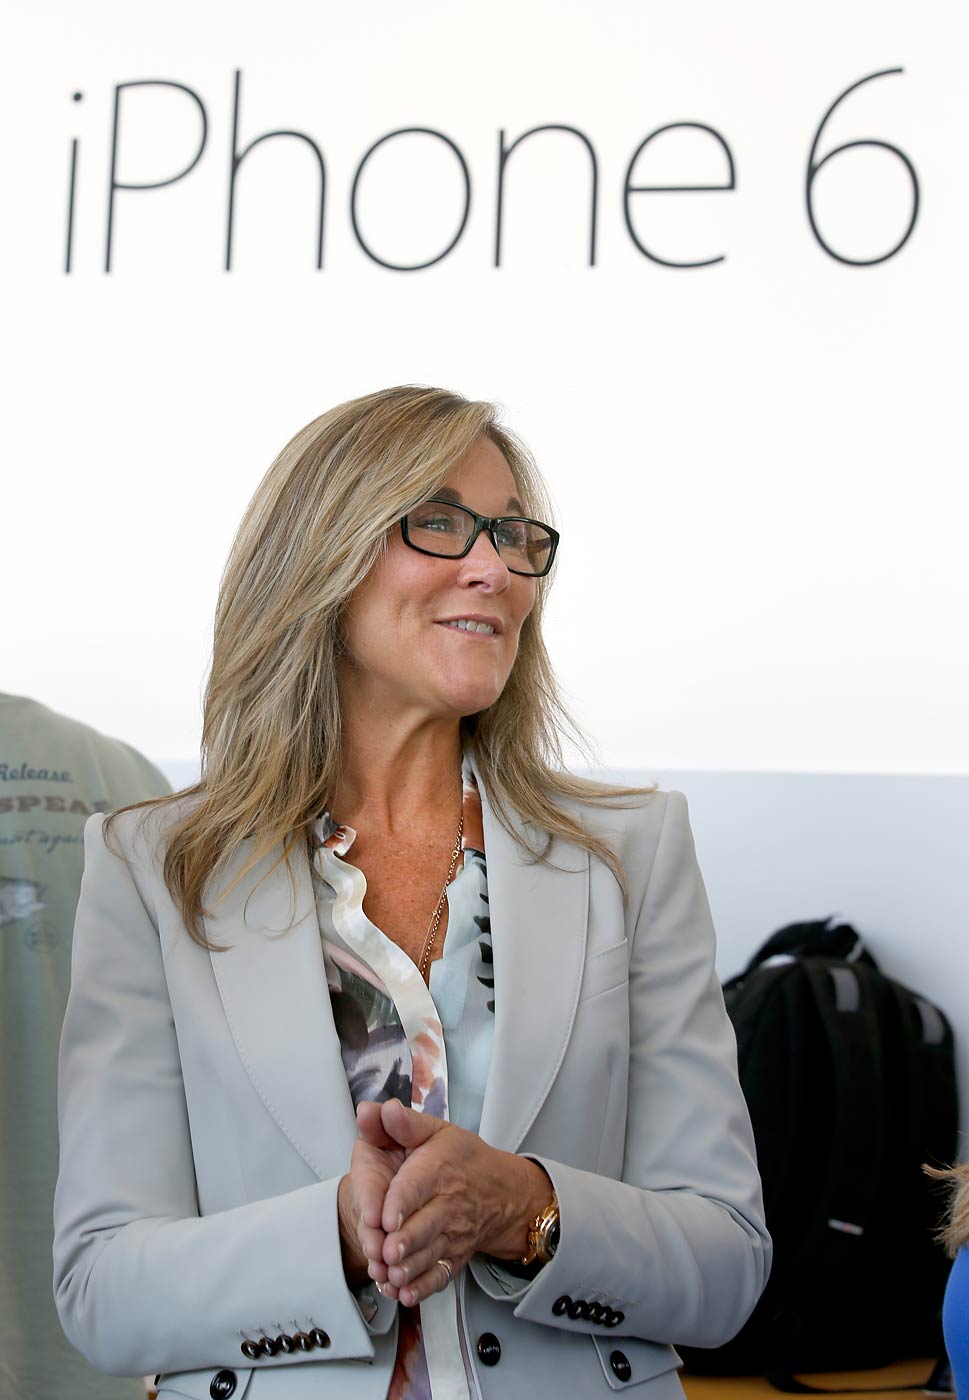 Angela Ahrendts, senior vice president of retail and online stores at Apple Inc., walks through the Apple Store during the launch and sale of the new iPhone 6 on Sept 19, 2014, in Palo Alto, Calif. (Tony Avelar—AP)